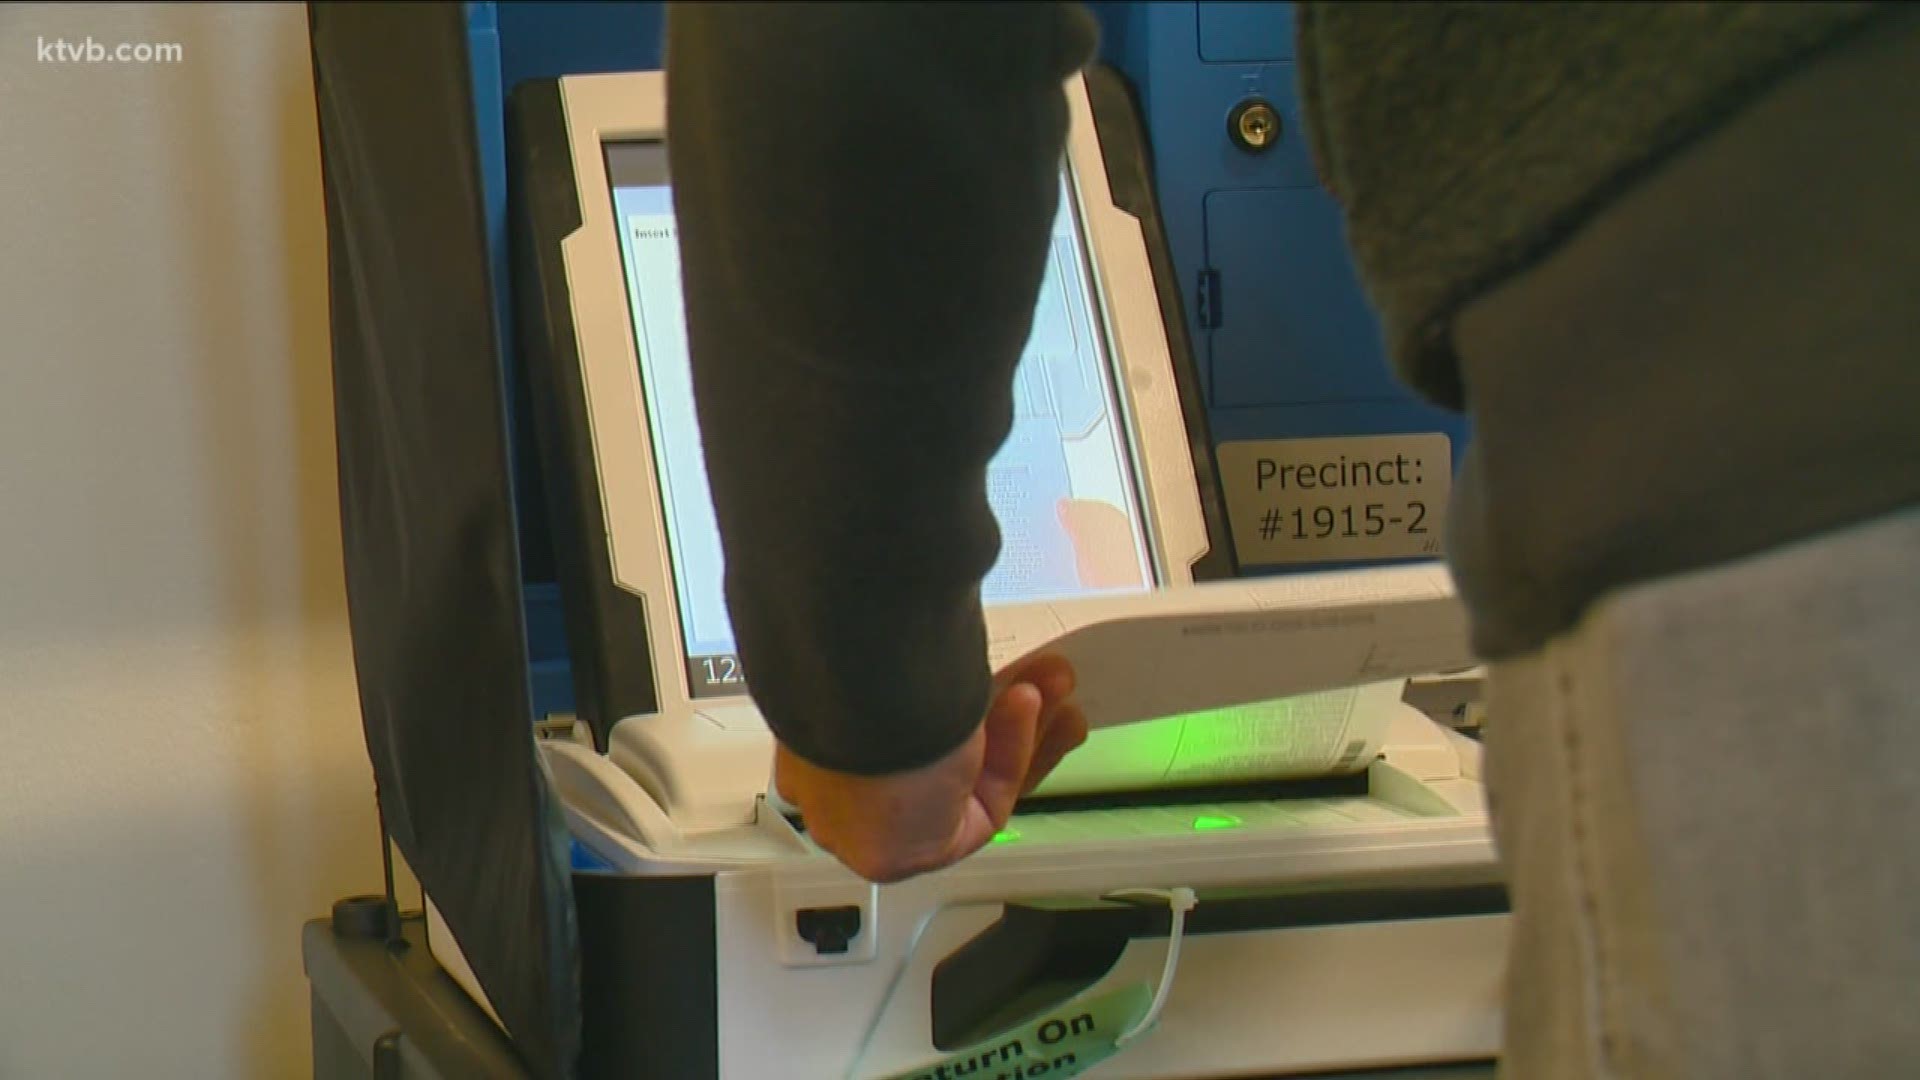 Idaho's secretary of state said all registered voters will be sent absentee ballot request forms in the next couple weeks.